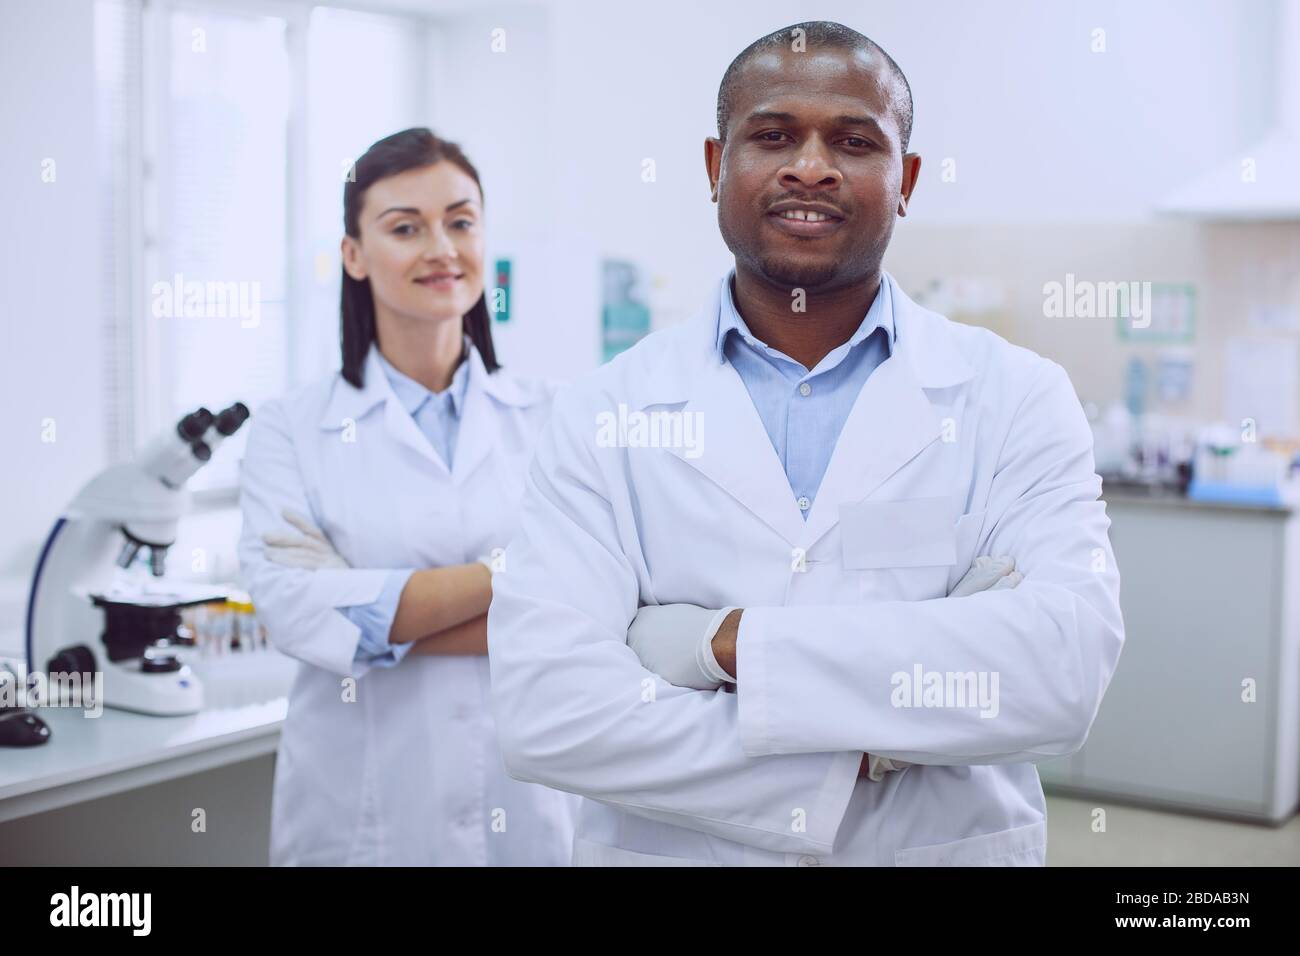 Cheerful biologists standing together in the lab Stock Photo